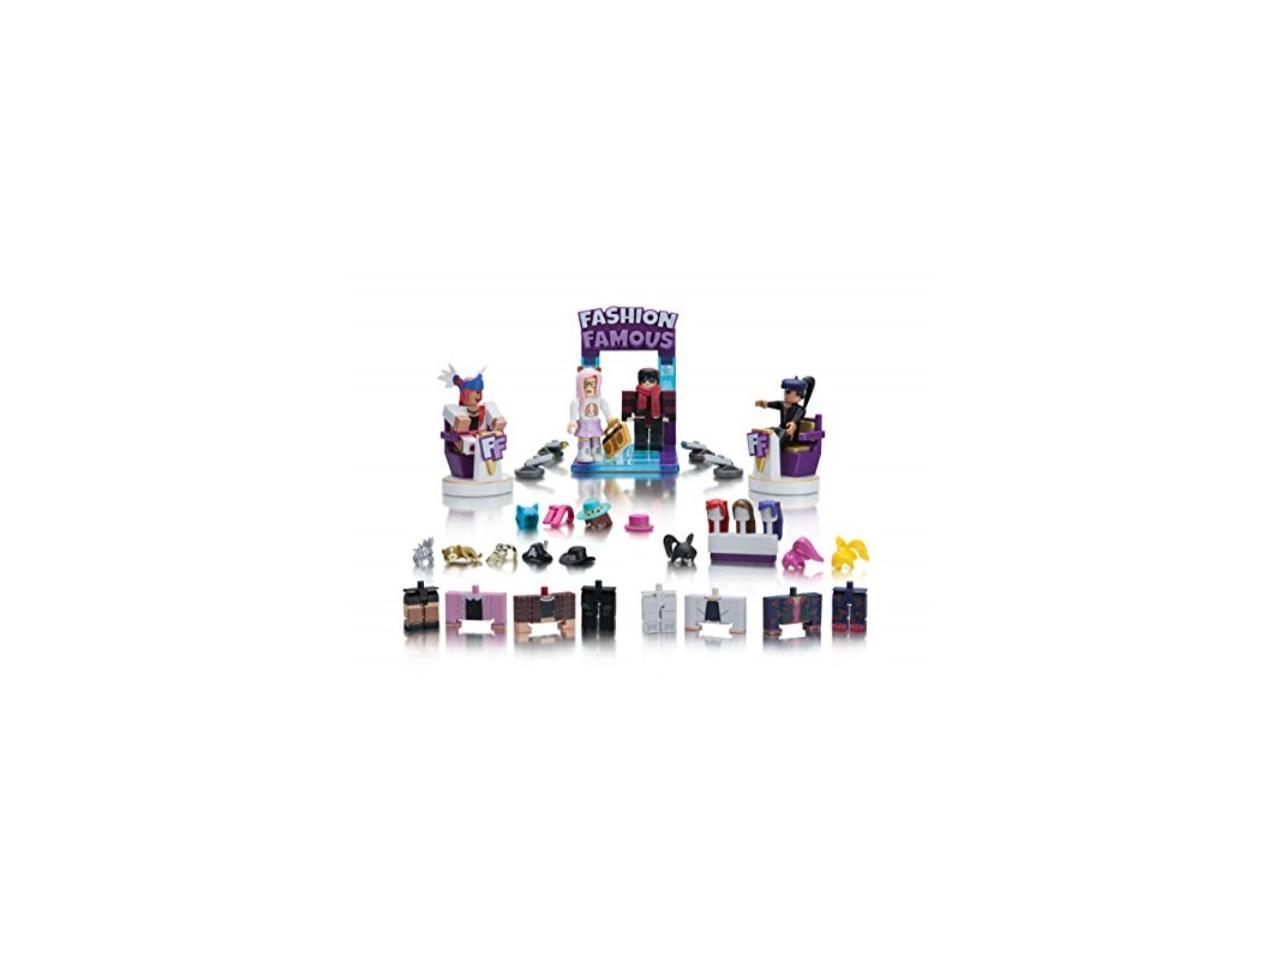 Roblox Celebrity Fashion Famous Playset Newegg Com - ps3 roblox roblox